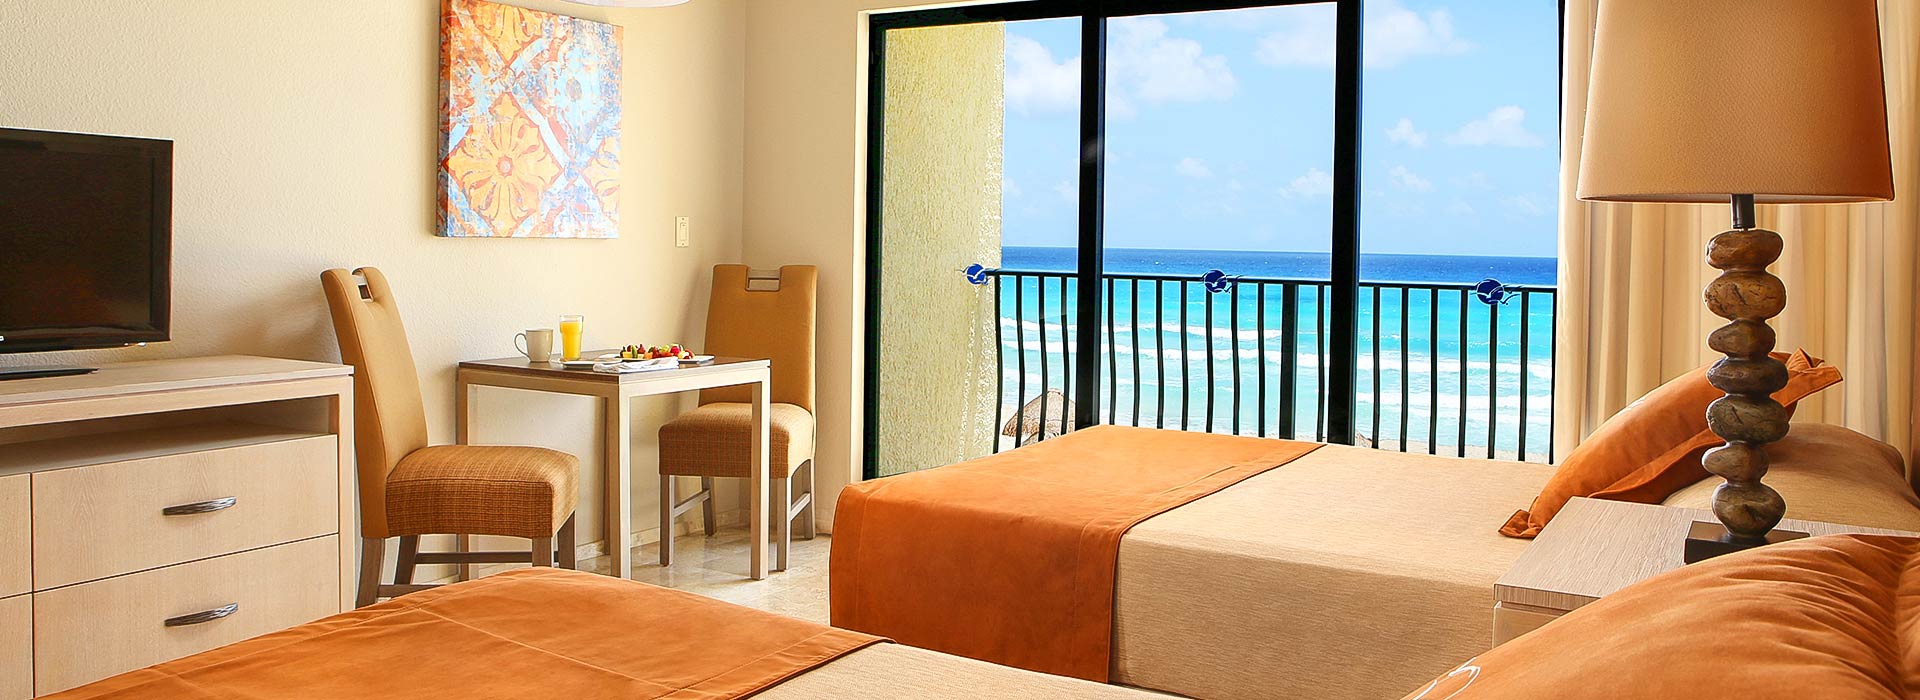 The most beautiful beachfront resort in Cancun with unparalleled oceanviews for a family vacation